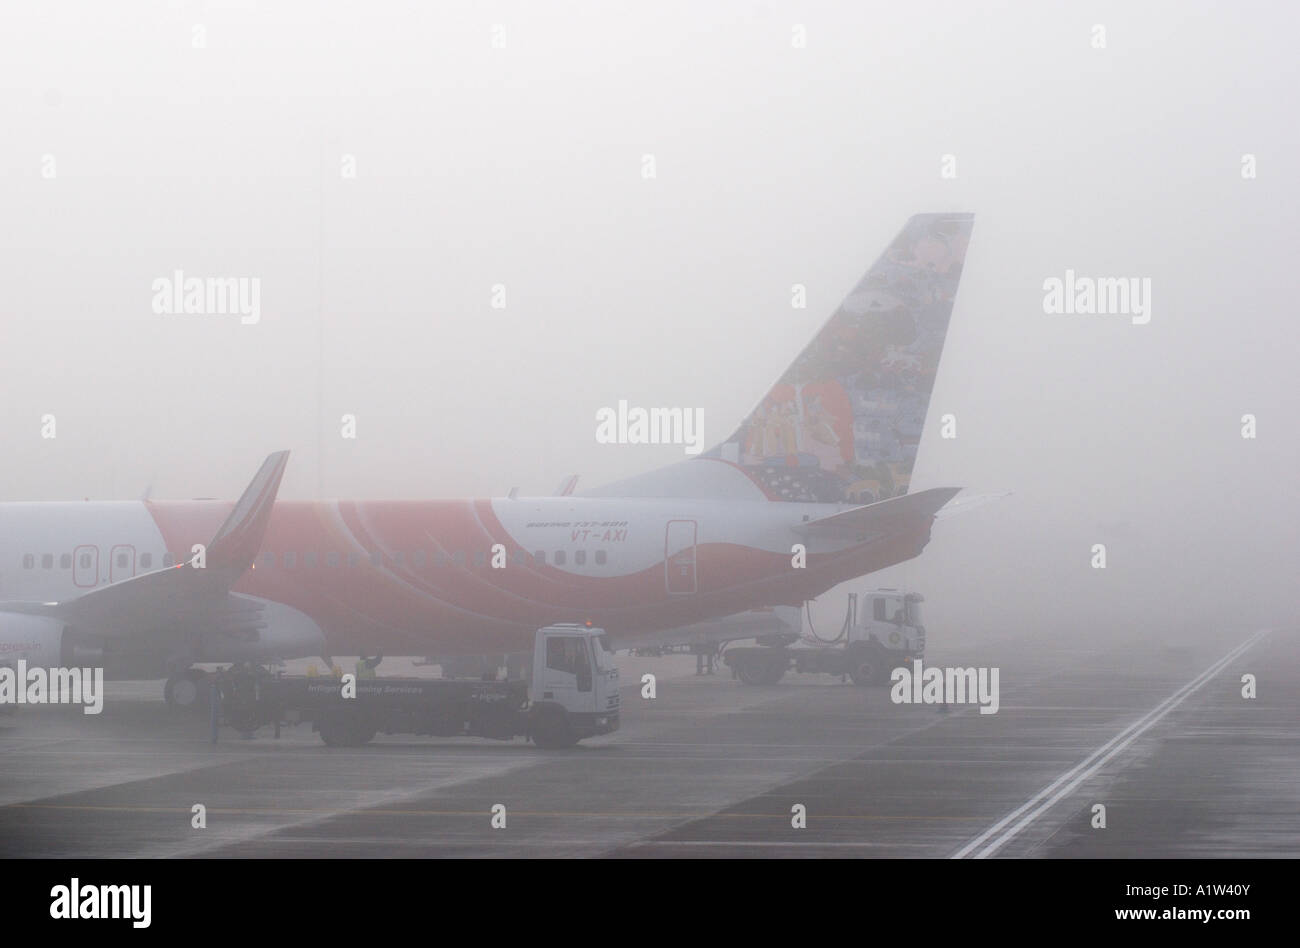 Air India Express Boeing 737 800 aircraft in winter fog at Birmingham International Airport, West Midlands, England, UK Stock Photo